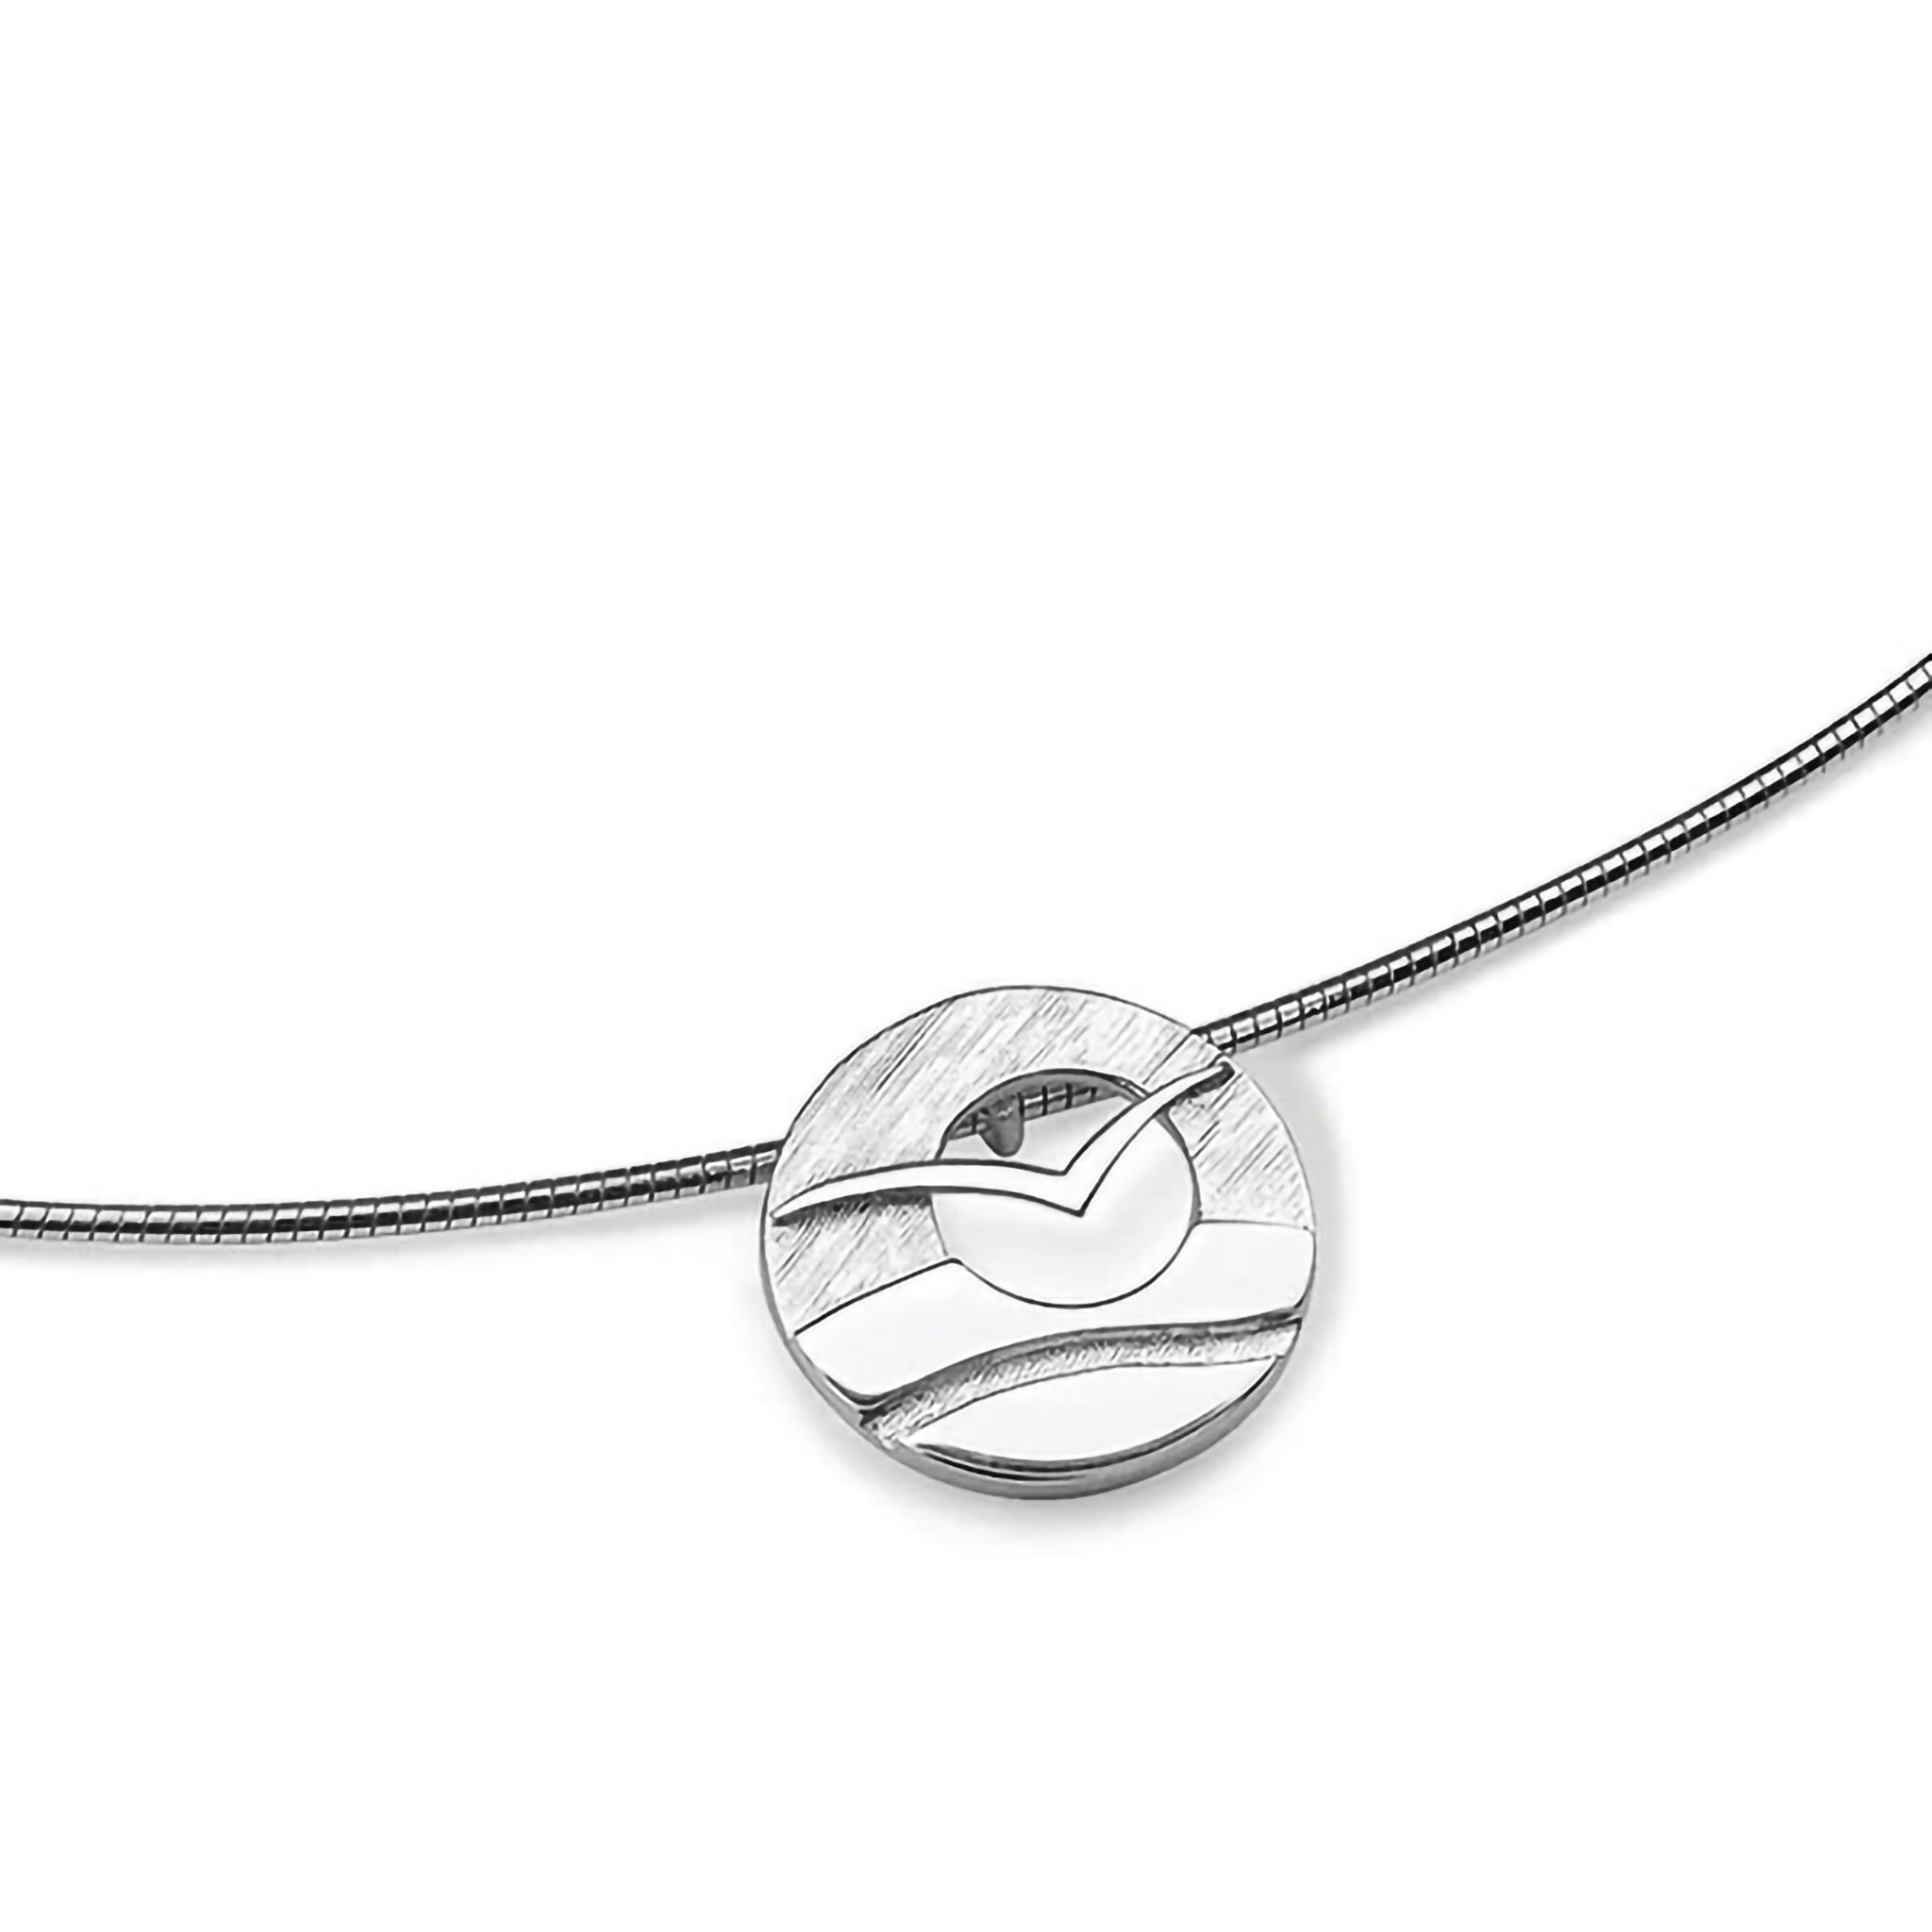 A silver wire necklet with small pendant featuring a flying sea bird in front of a cutout sun over water